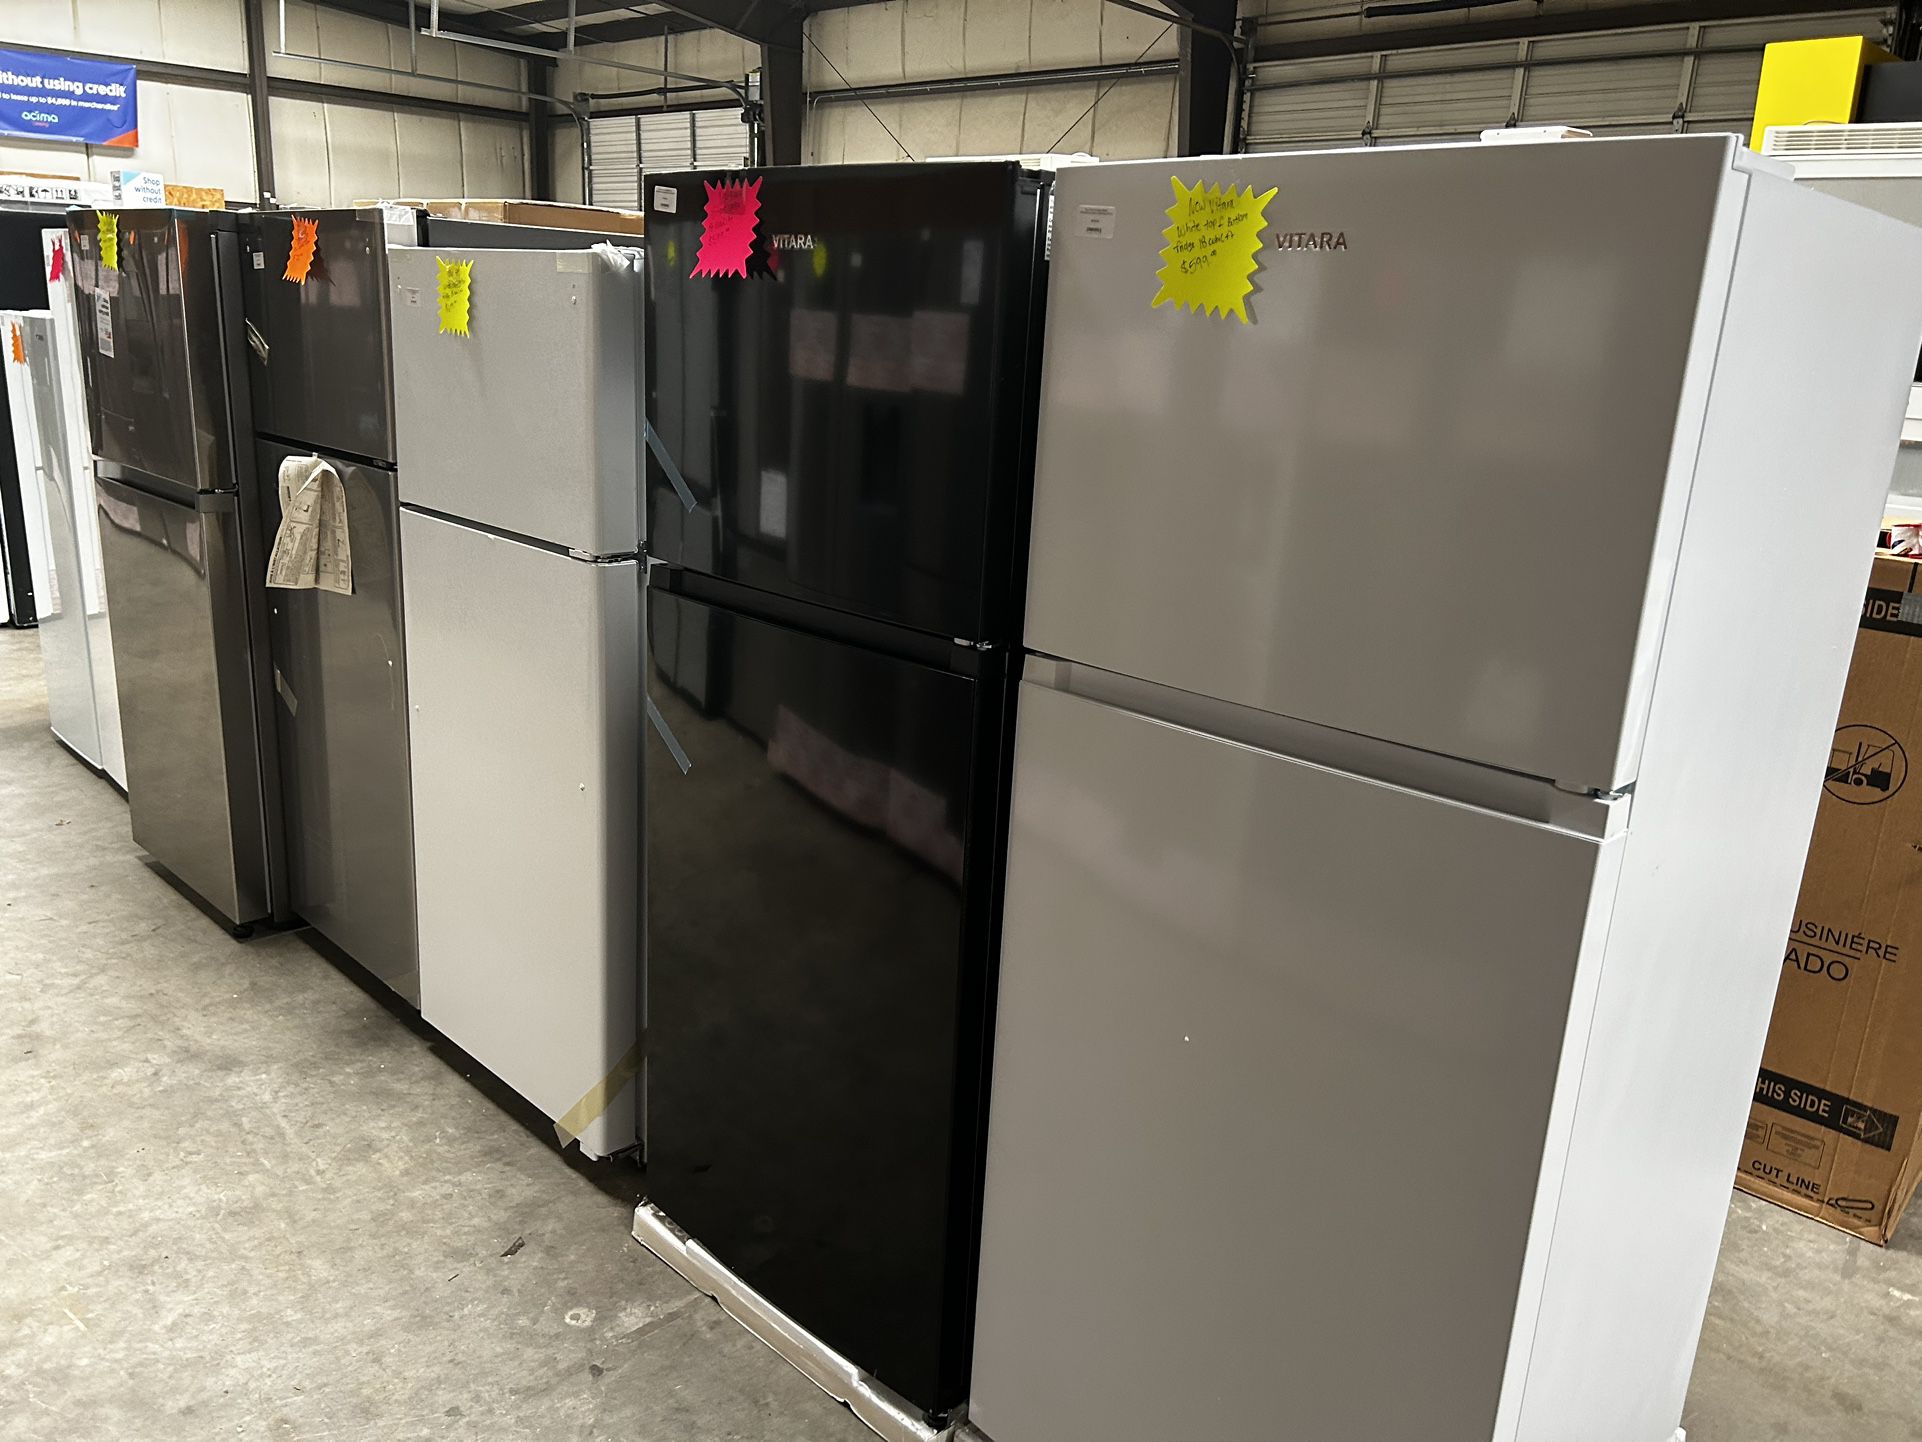 New Top And Bottom Fridges ! Financing Available Message For More Details